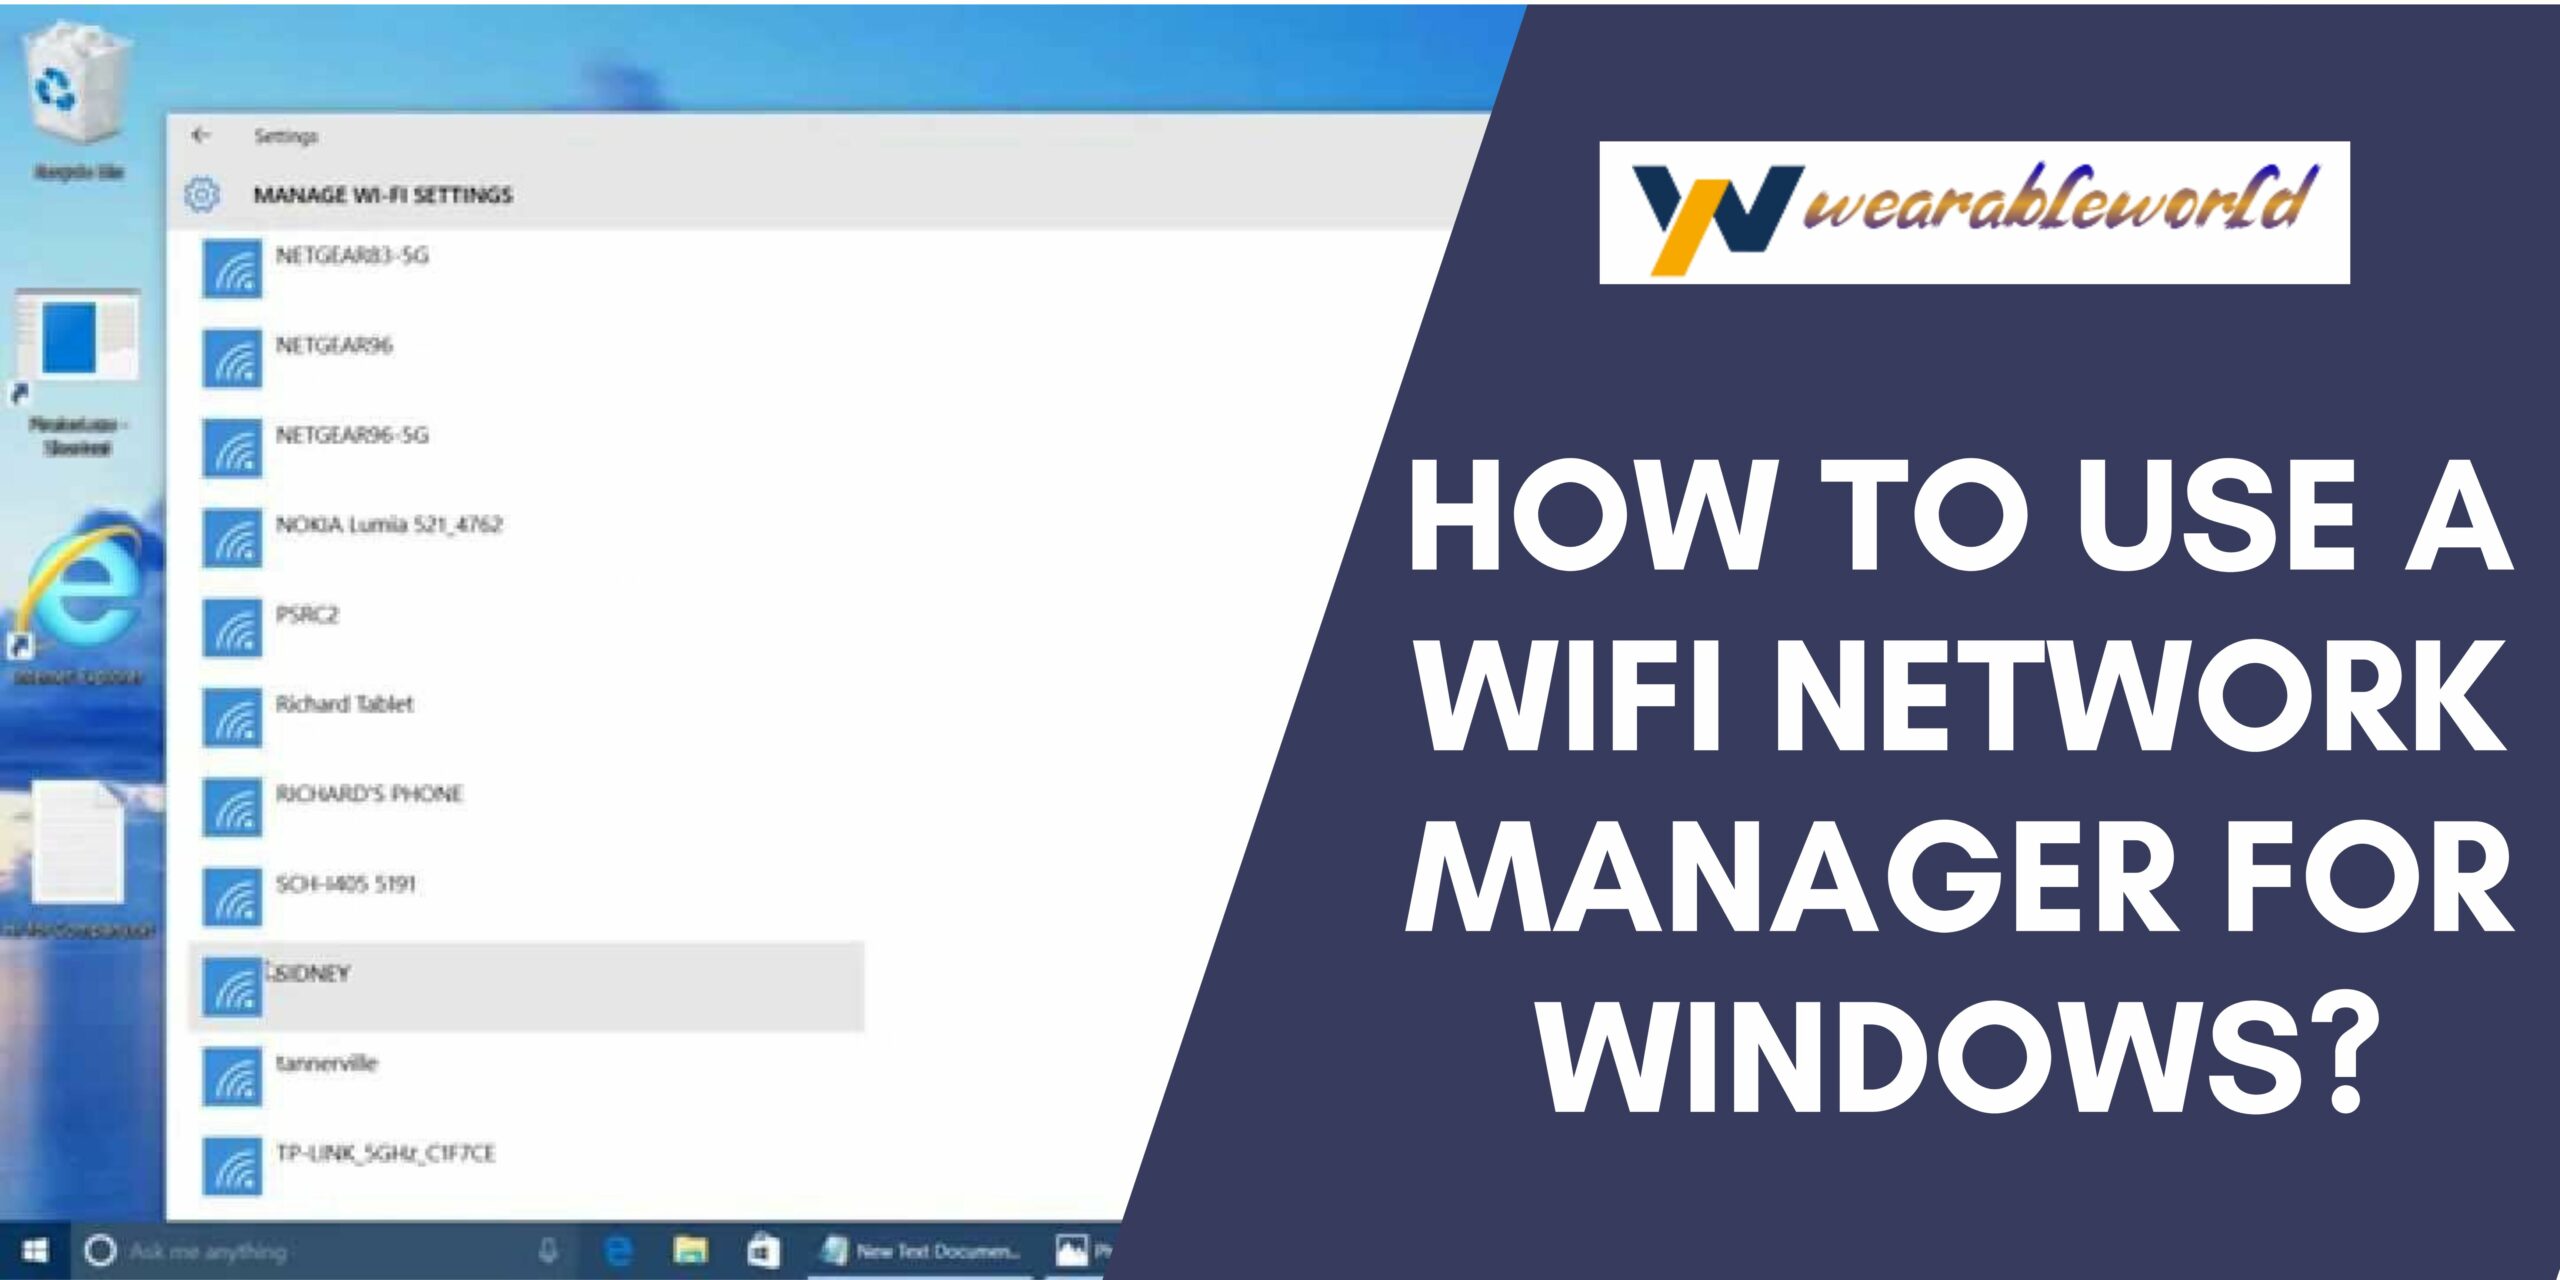 Use a WiFi Network Manager for Windows